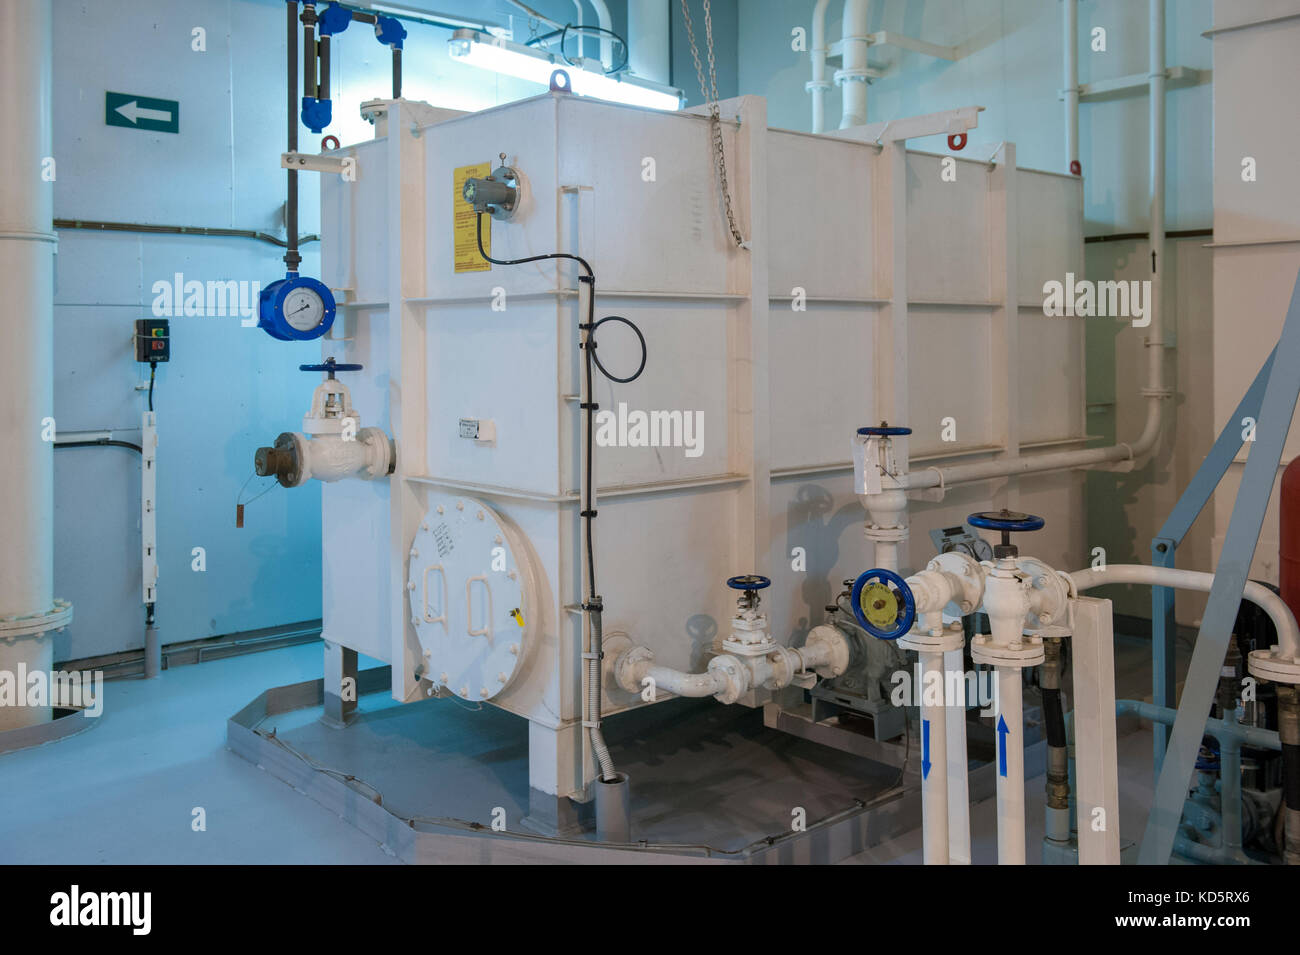 Container ship sewage treatment plant Stock Photo